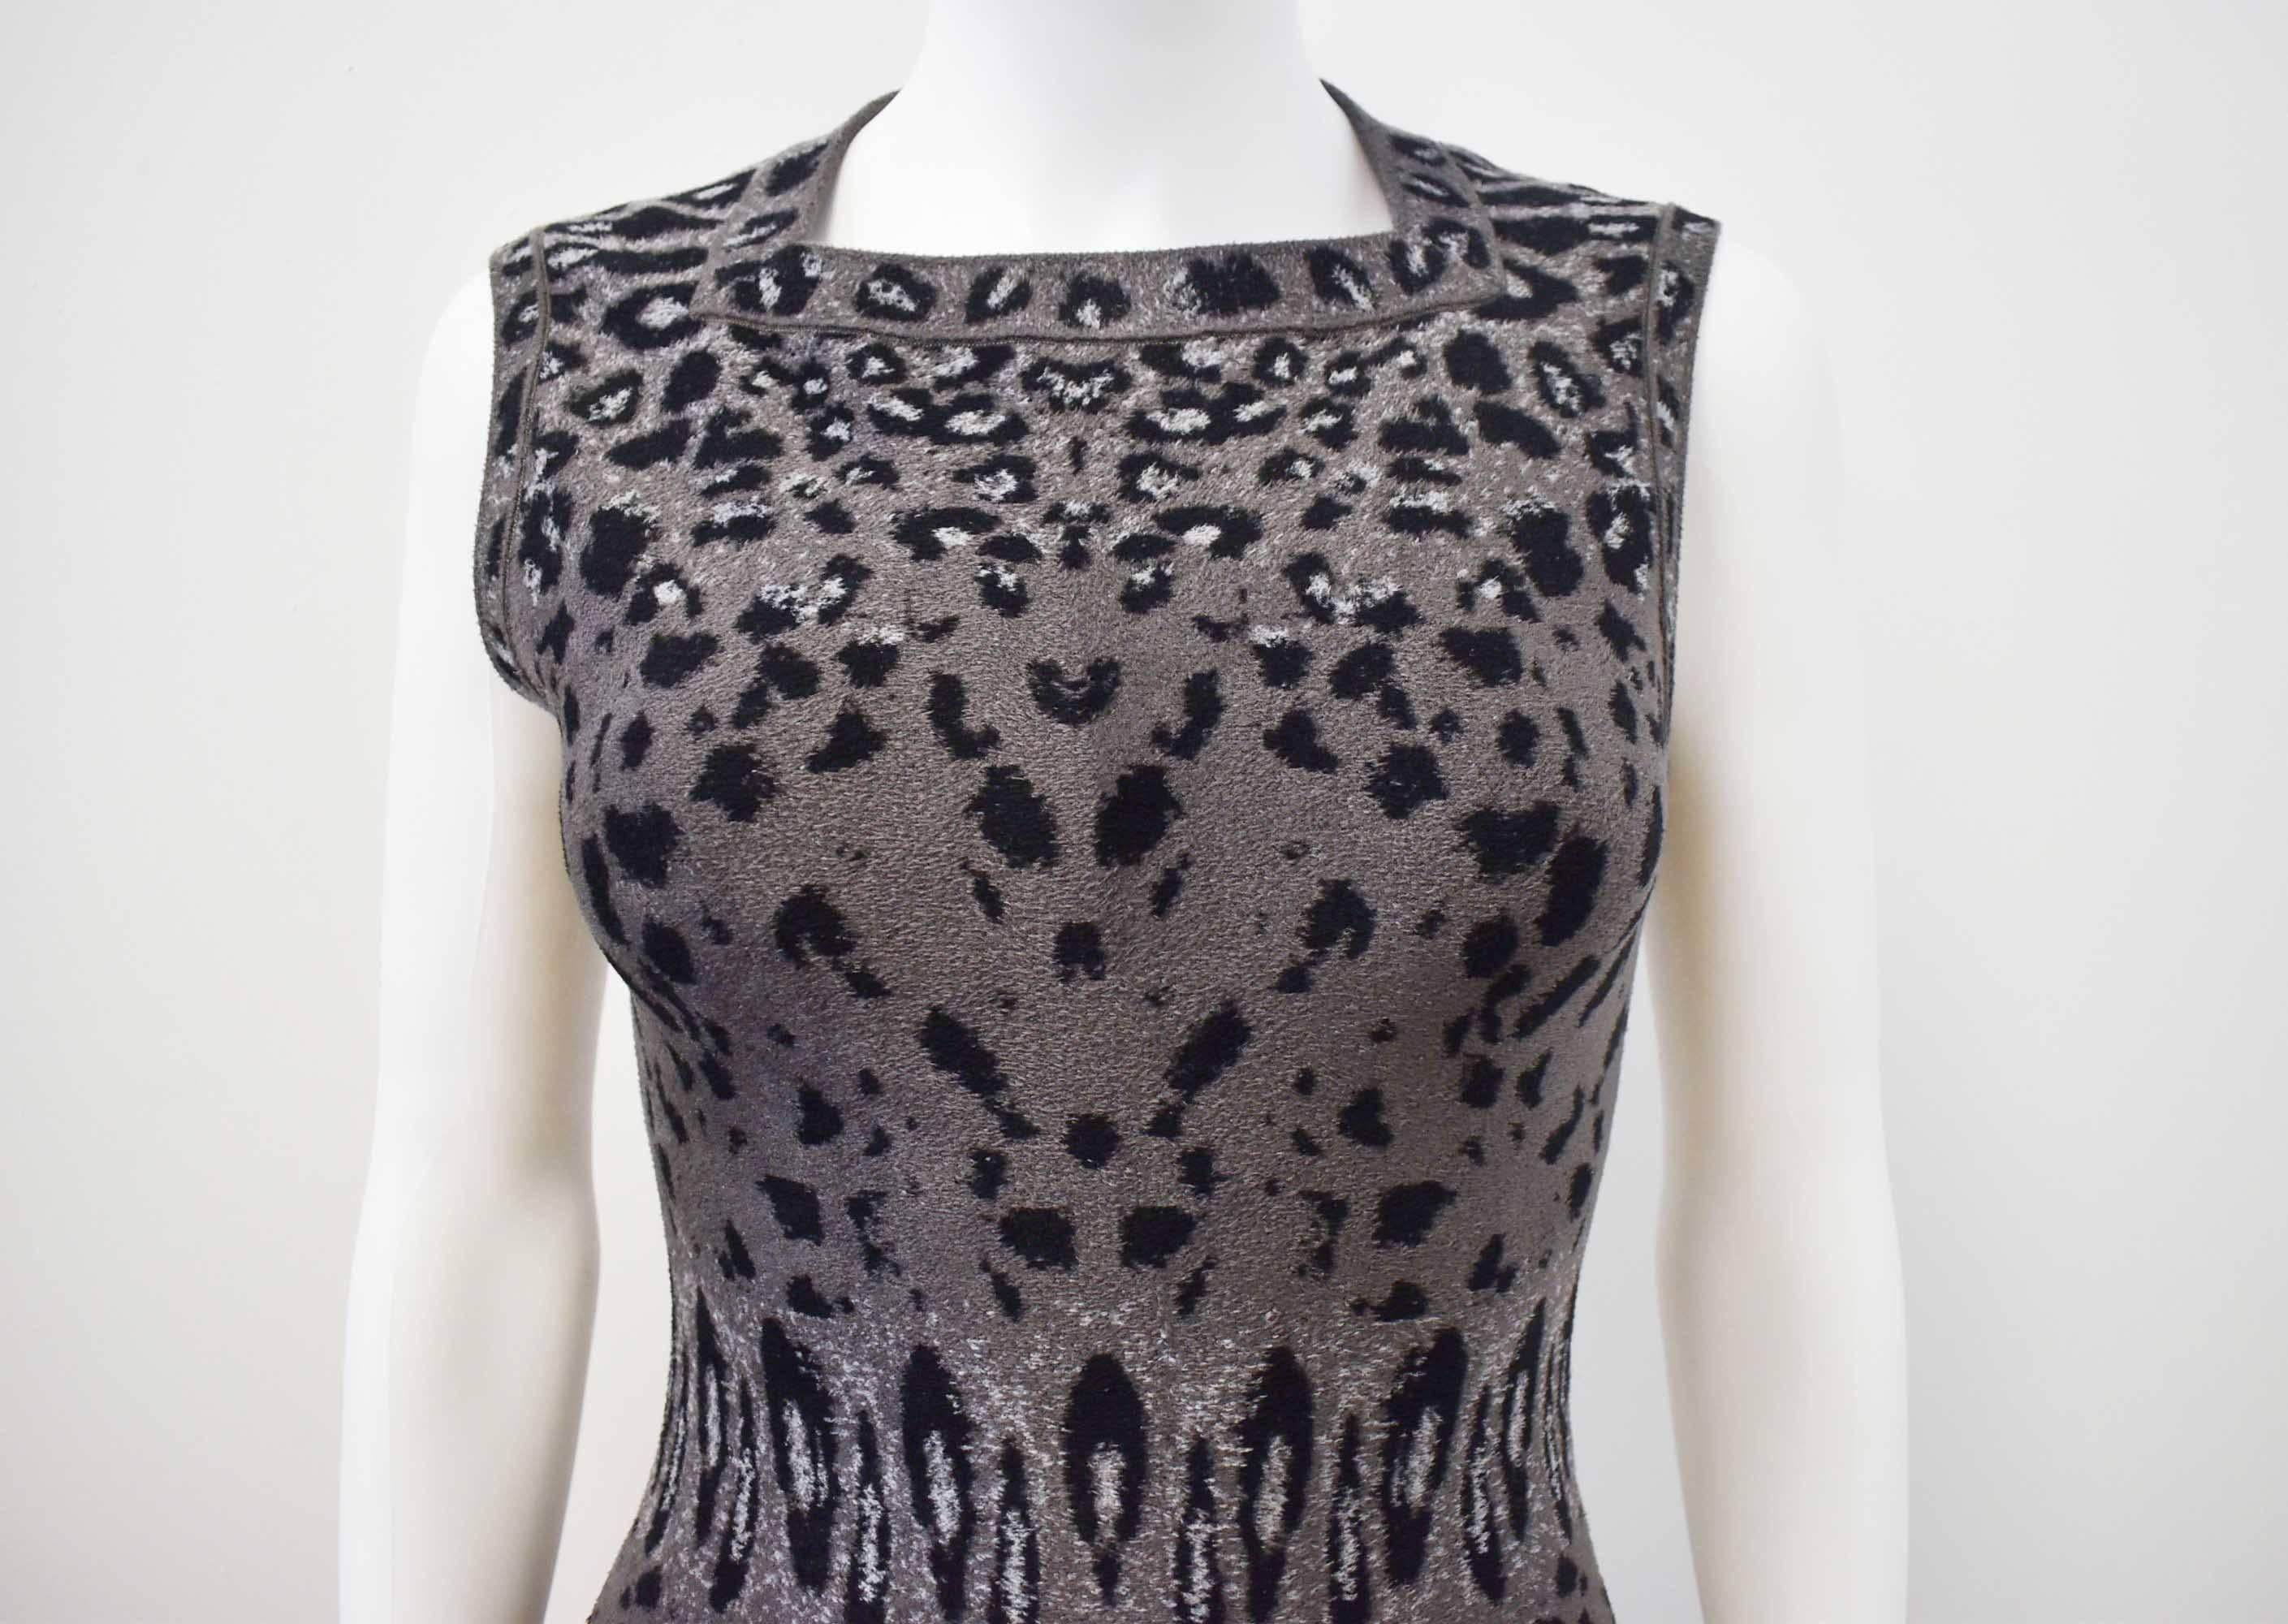 A soft textured, grey, leopard print body con dress from Azzedine Alaia. The dress is sleeveless with a square neckline and a long cut, falling to below the knee. The dress is made from Alaia’s signature stretch material creating a tight, fitted